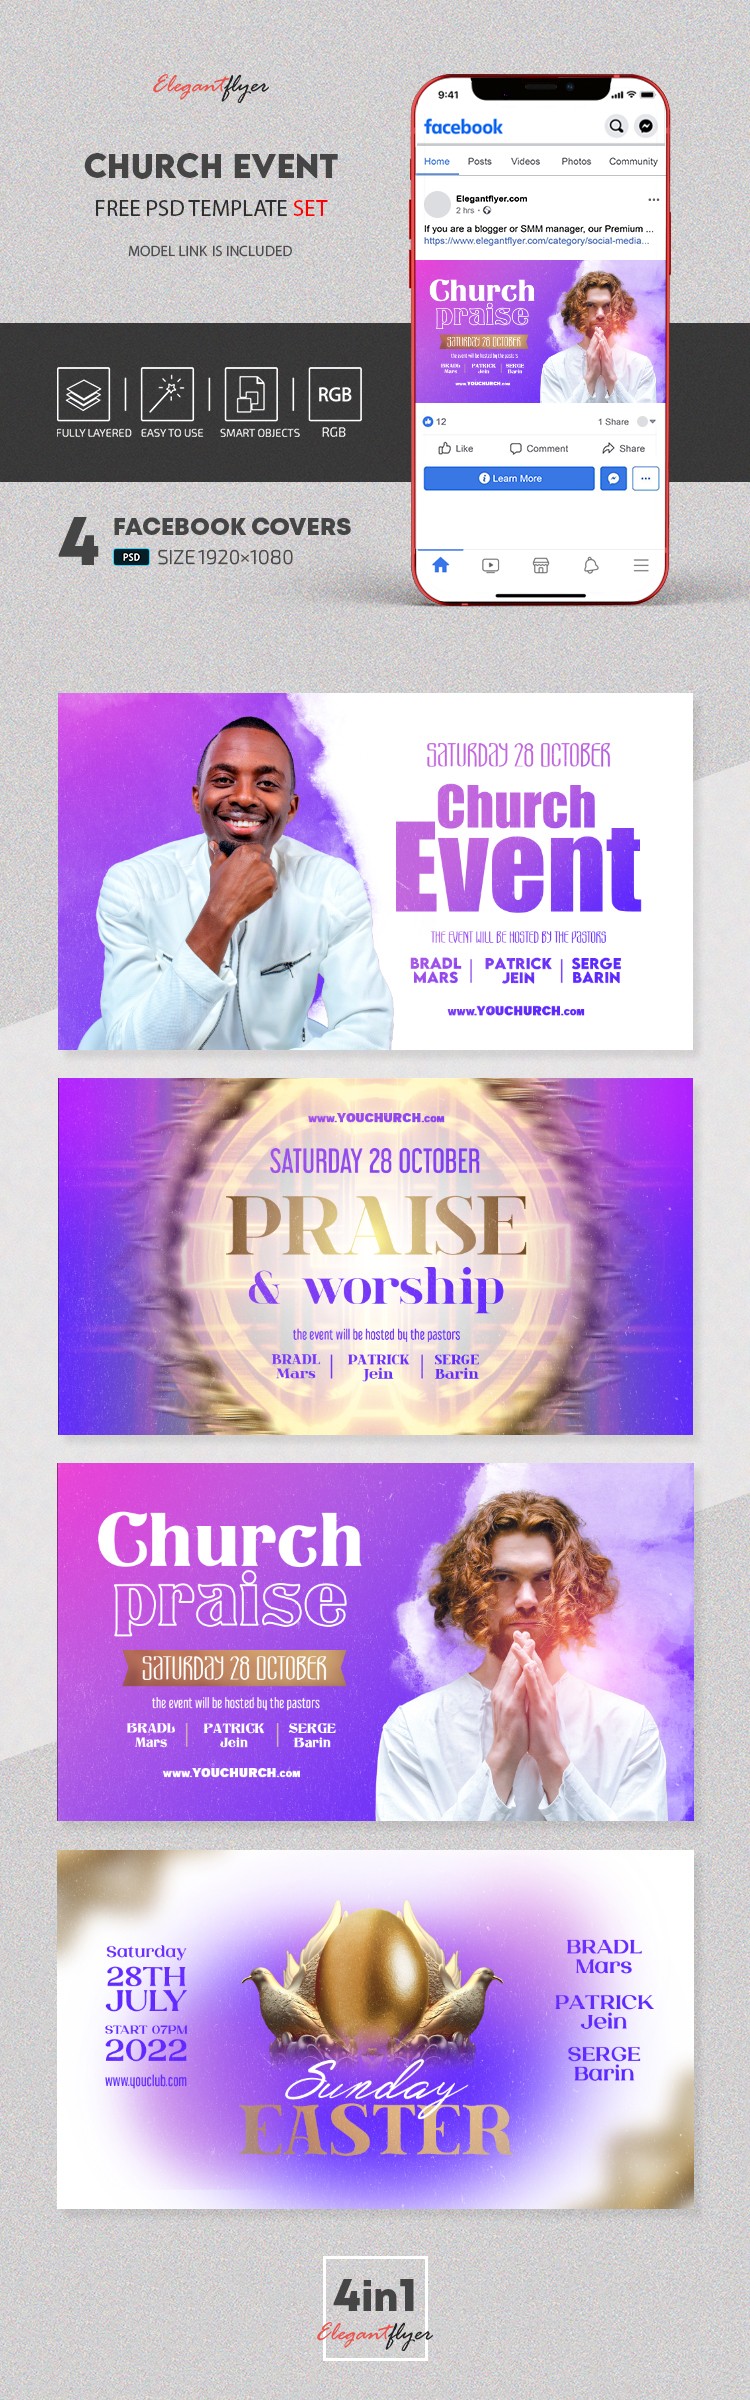 Church Event - Free Facebook Cover Templates Set in PSD by ElegantFlyer